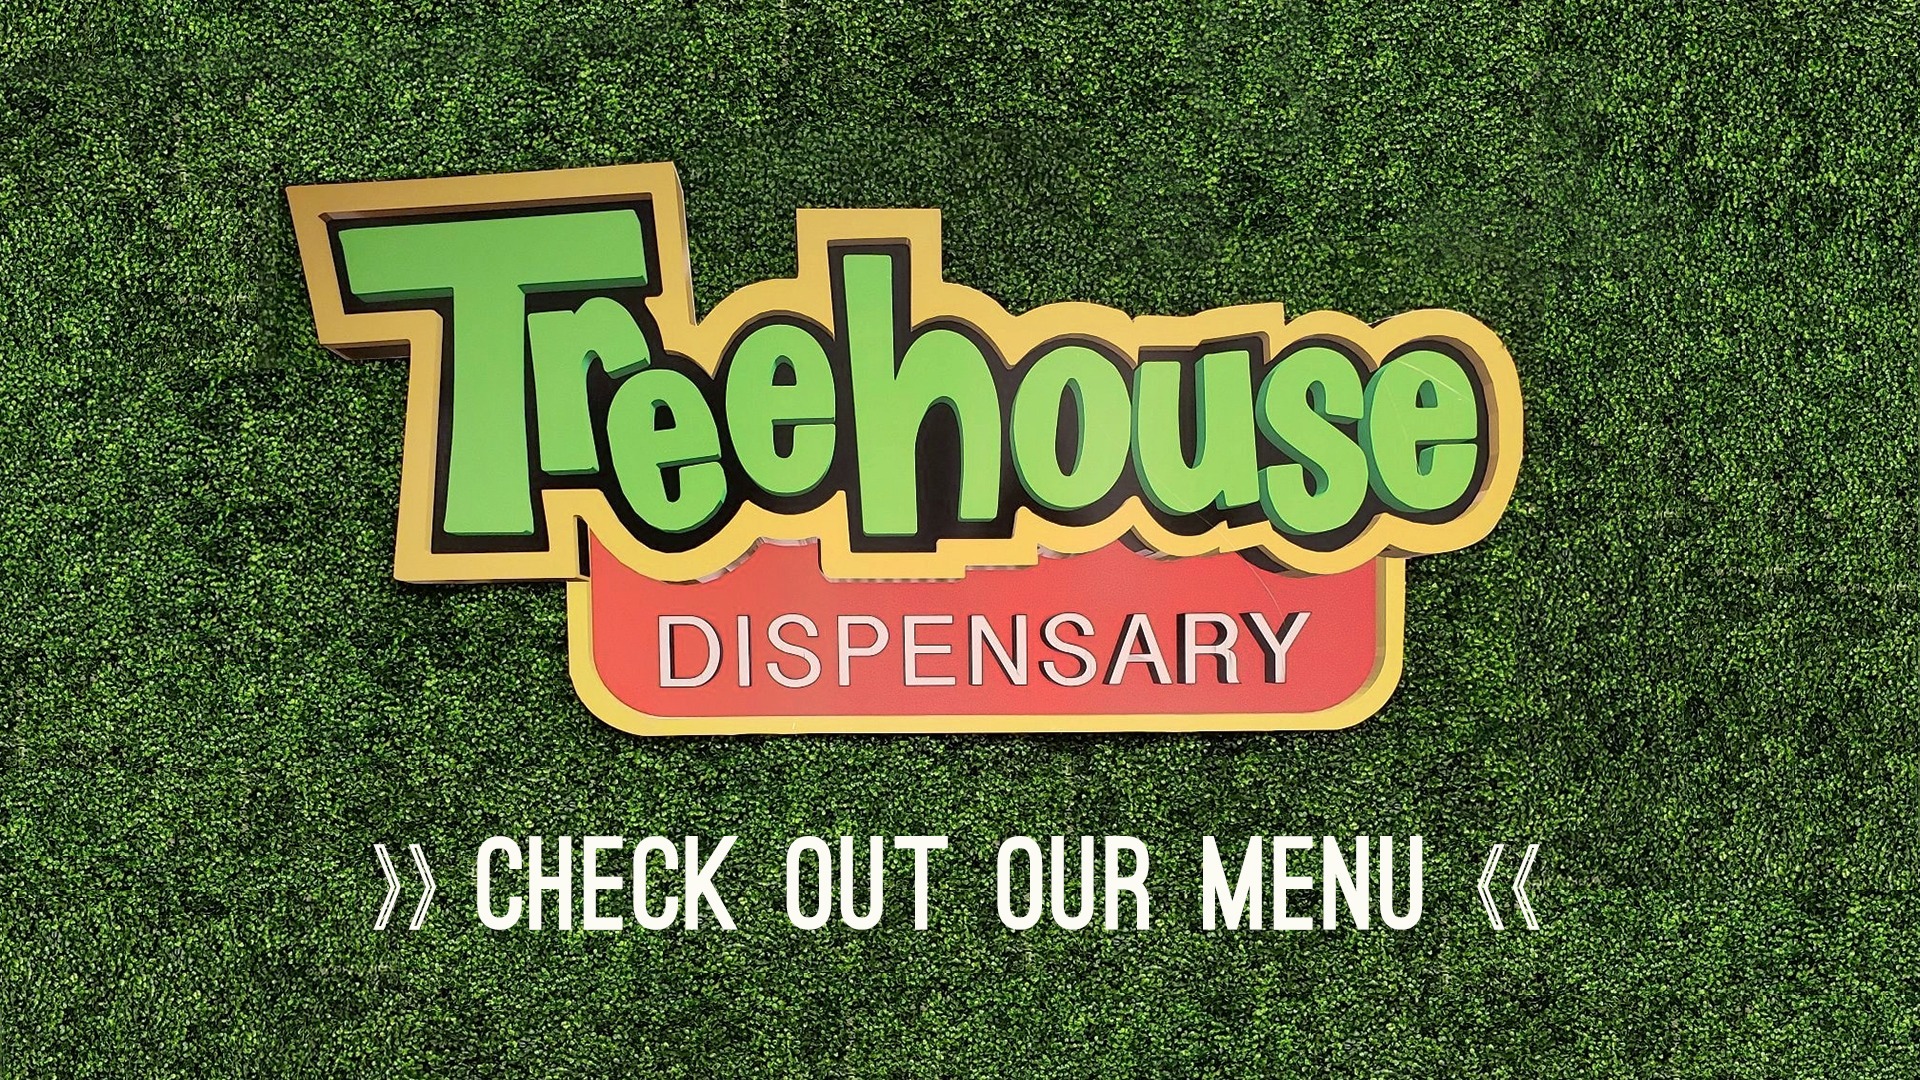 treehouse collective